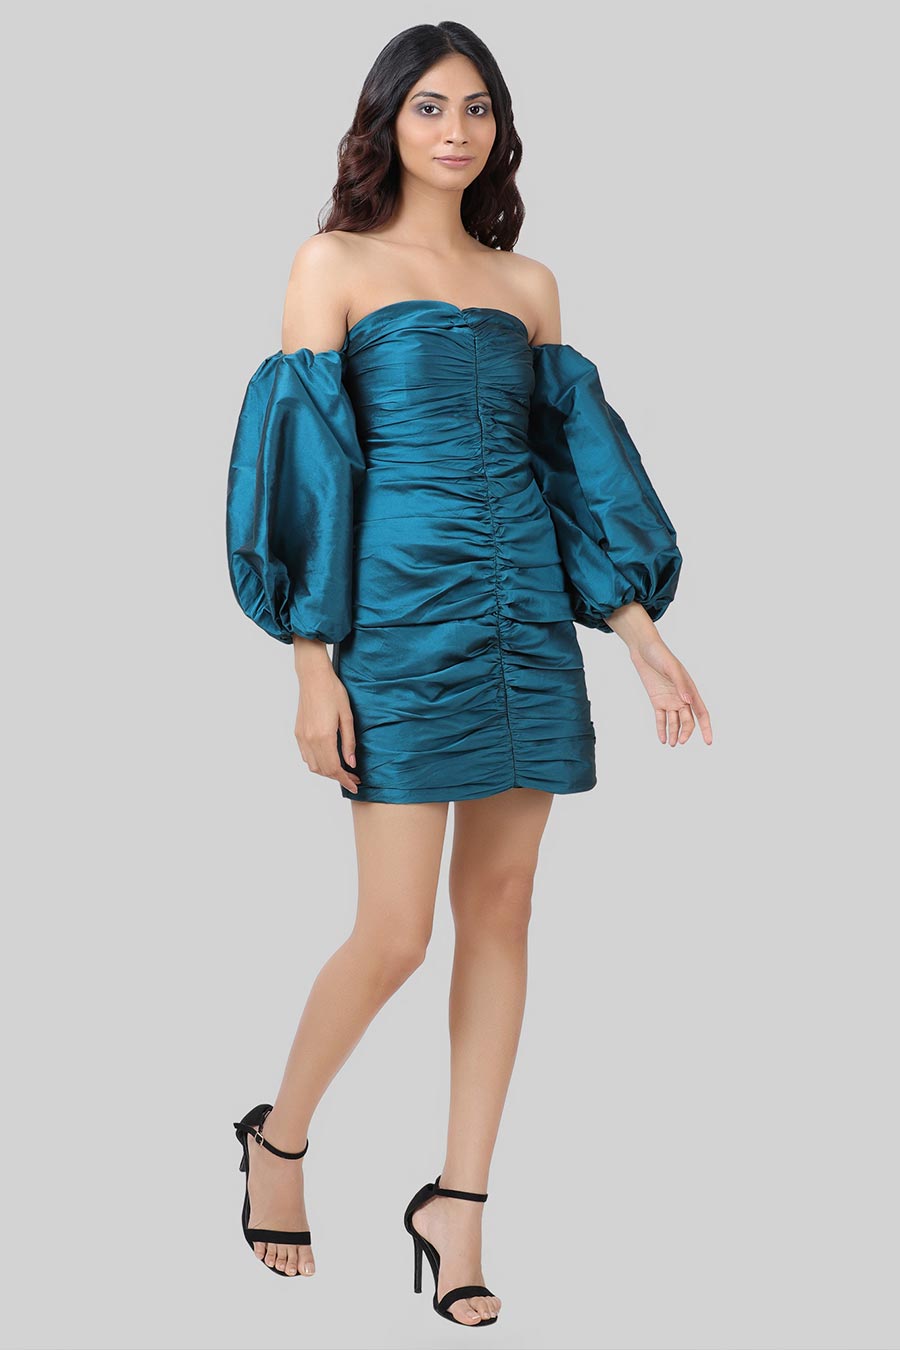 Phoebe Teal Ruched Bodycon Mini Dress